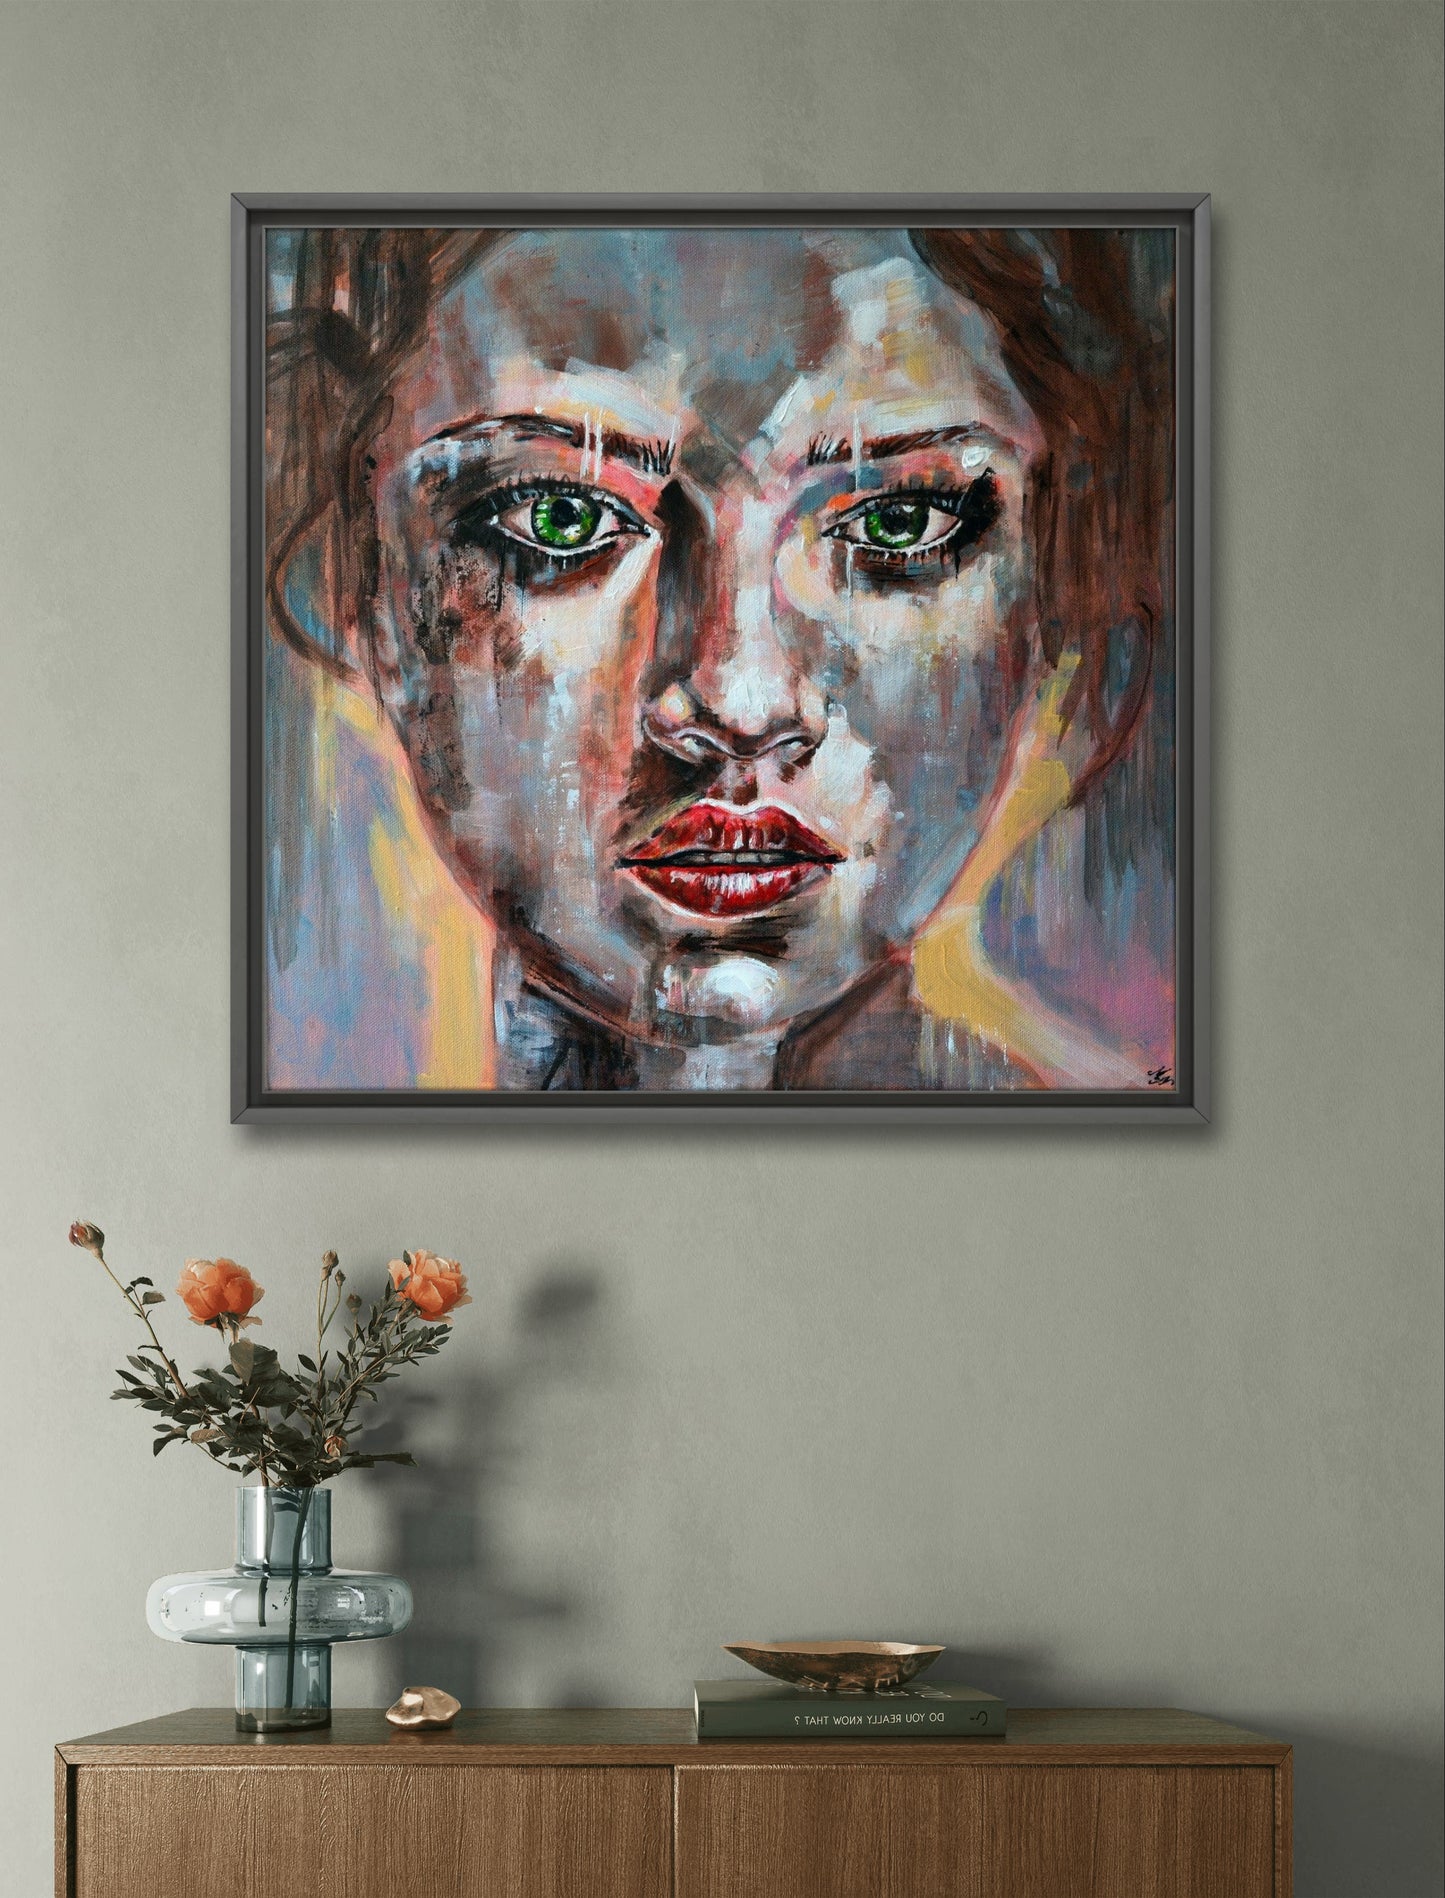 Colorful and emotional woman portrait painting on canvas, 'Shining,' by Misty Lady.